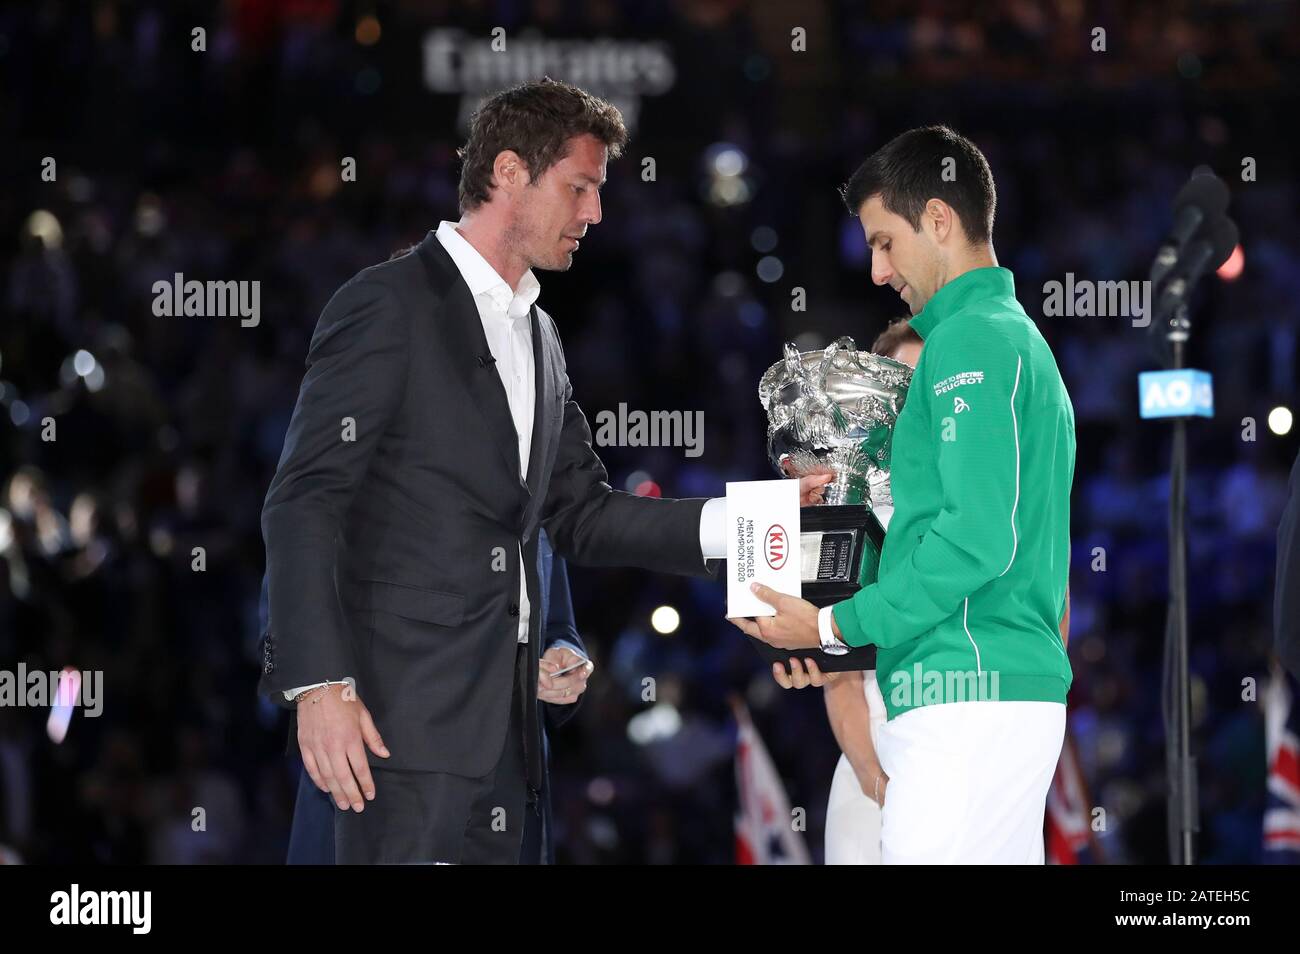 melbourne-australia-2nd-feb-2020-russias-marat-safin-l-hands-the-trophy-to-novak-djokovic-of-serbia-during-the-awarding-ceremony-after-the-mens-singles-final-against-dominic-thiem-of-austria-at-2020-australian-open-in-melbourne-australia-on-feb-2-2020-credit-bai-xuefeixinhuaalamy-live-news-2ATEH5C.jpg